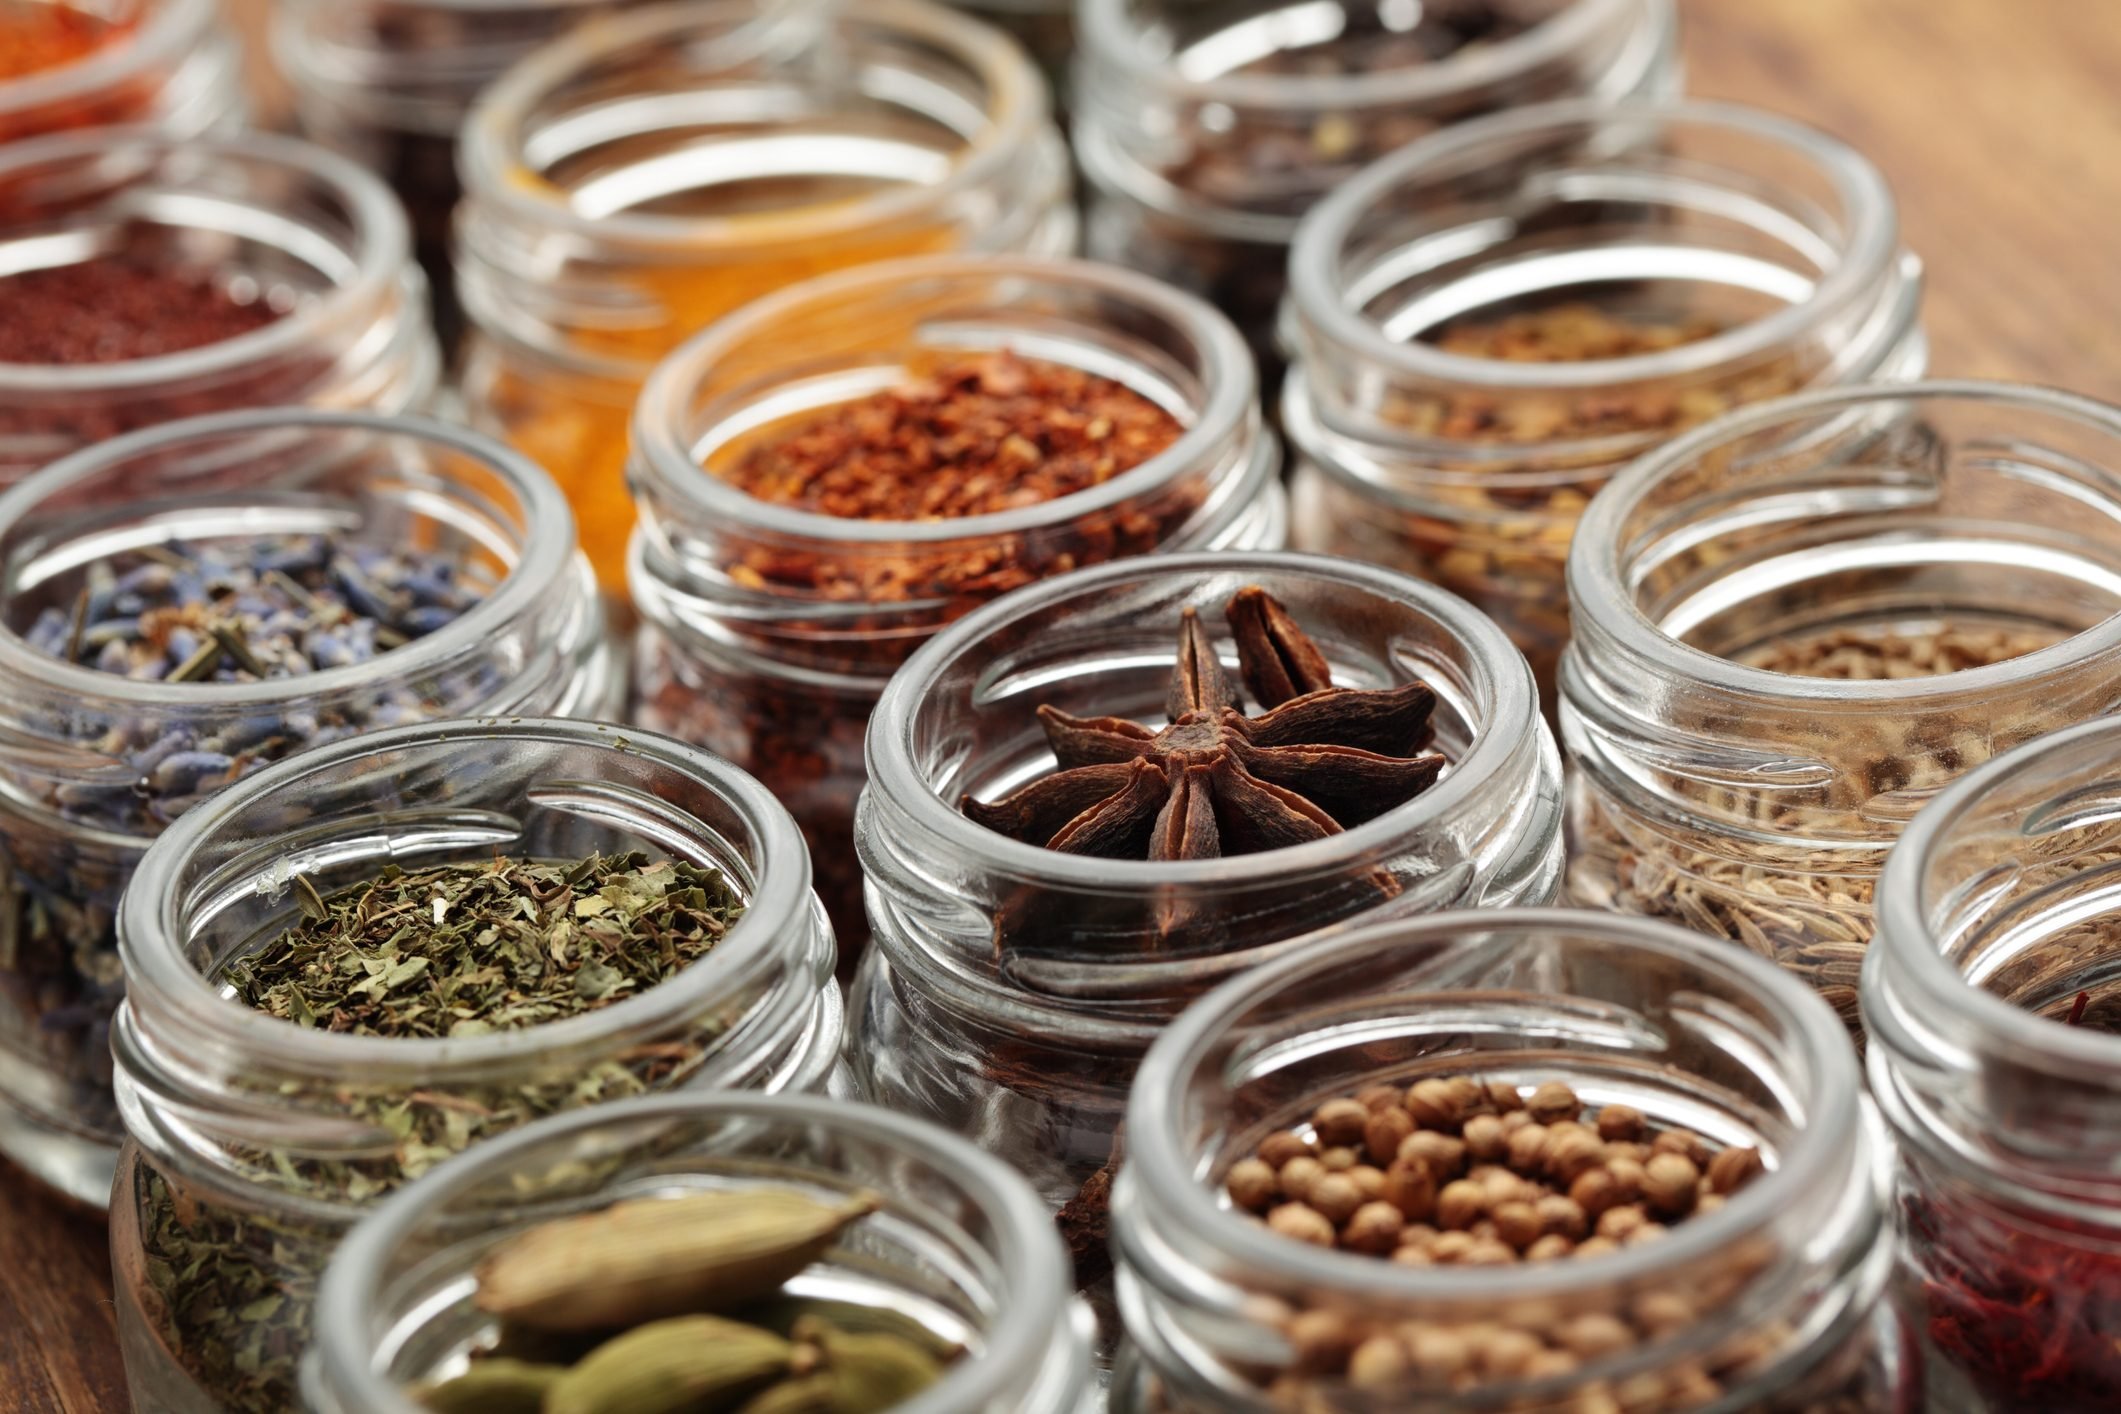 Spice Rack Gift Set, Includes 30 Flavorful Spices and Seasonings